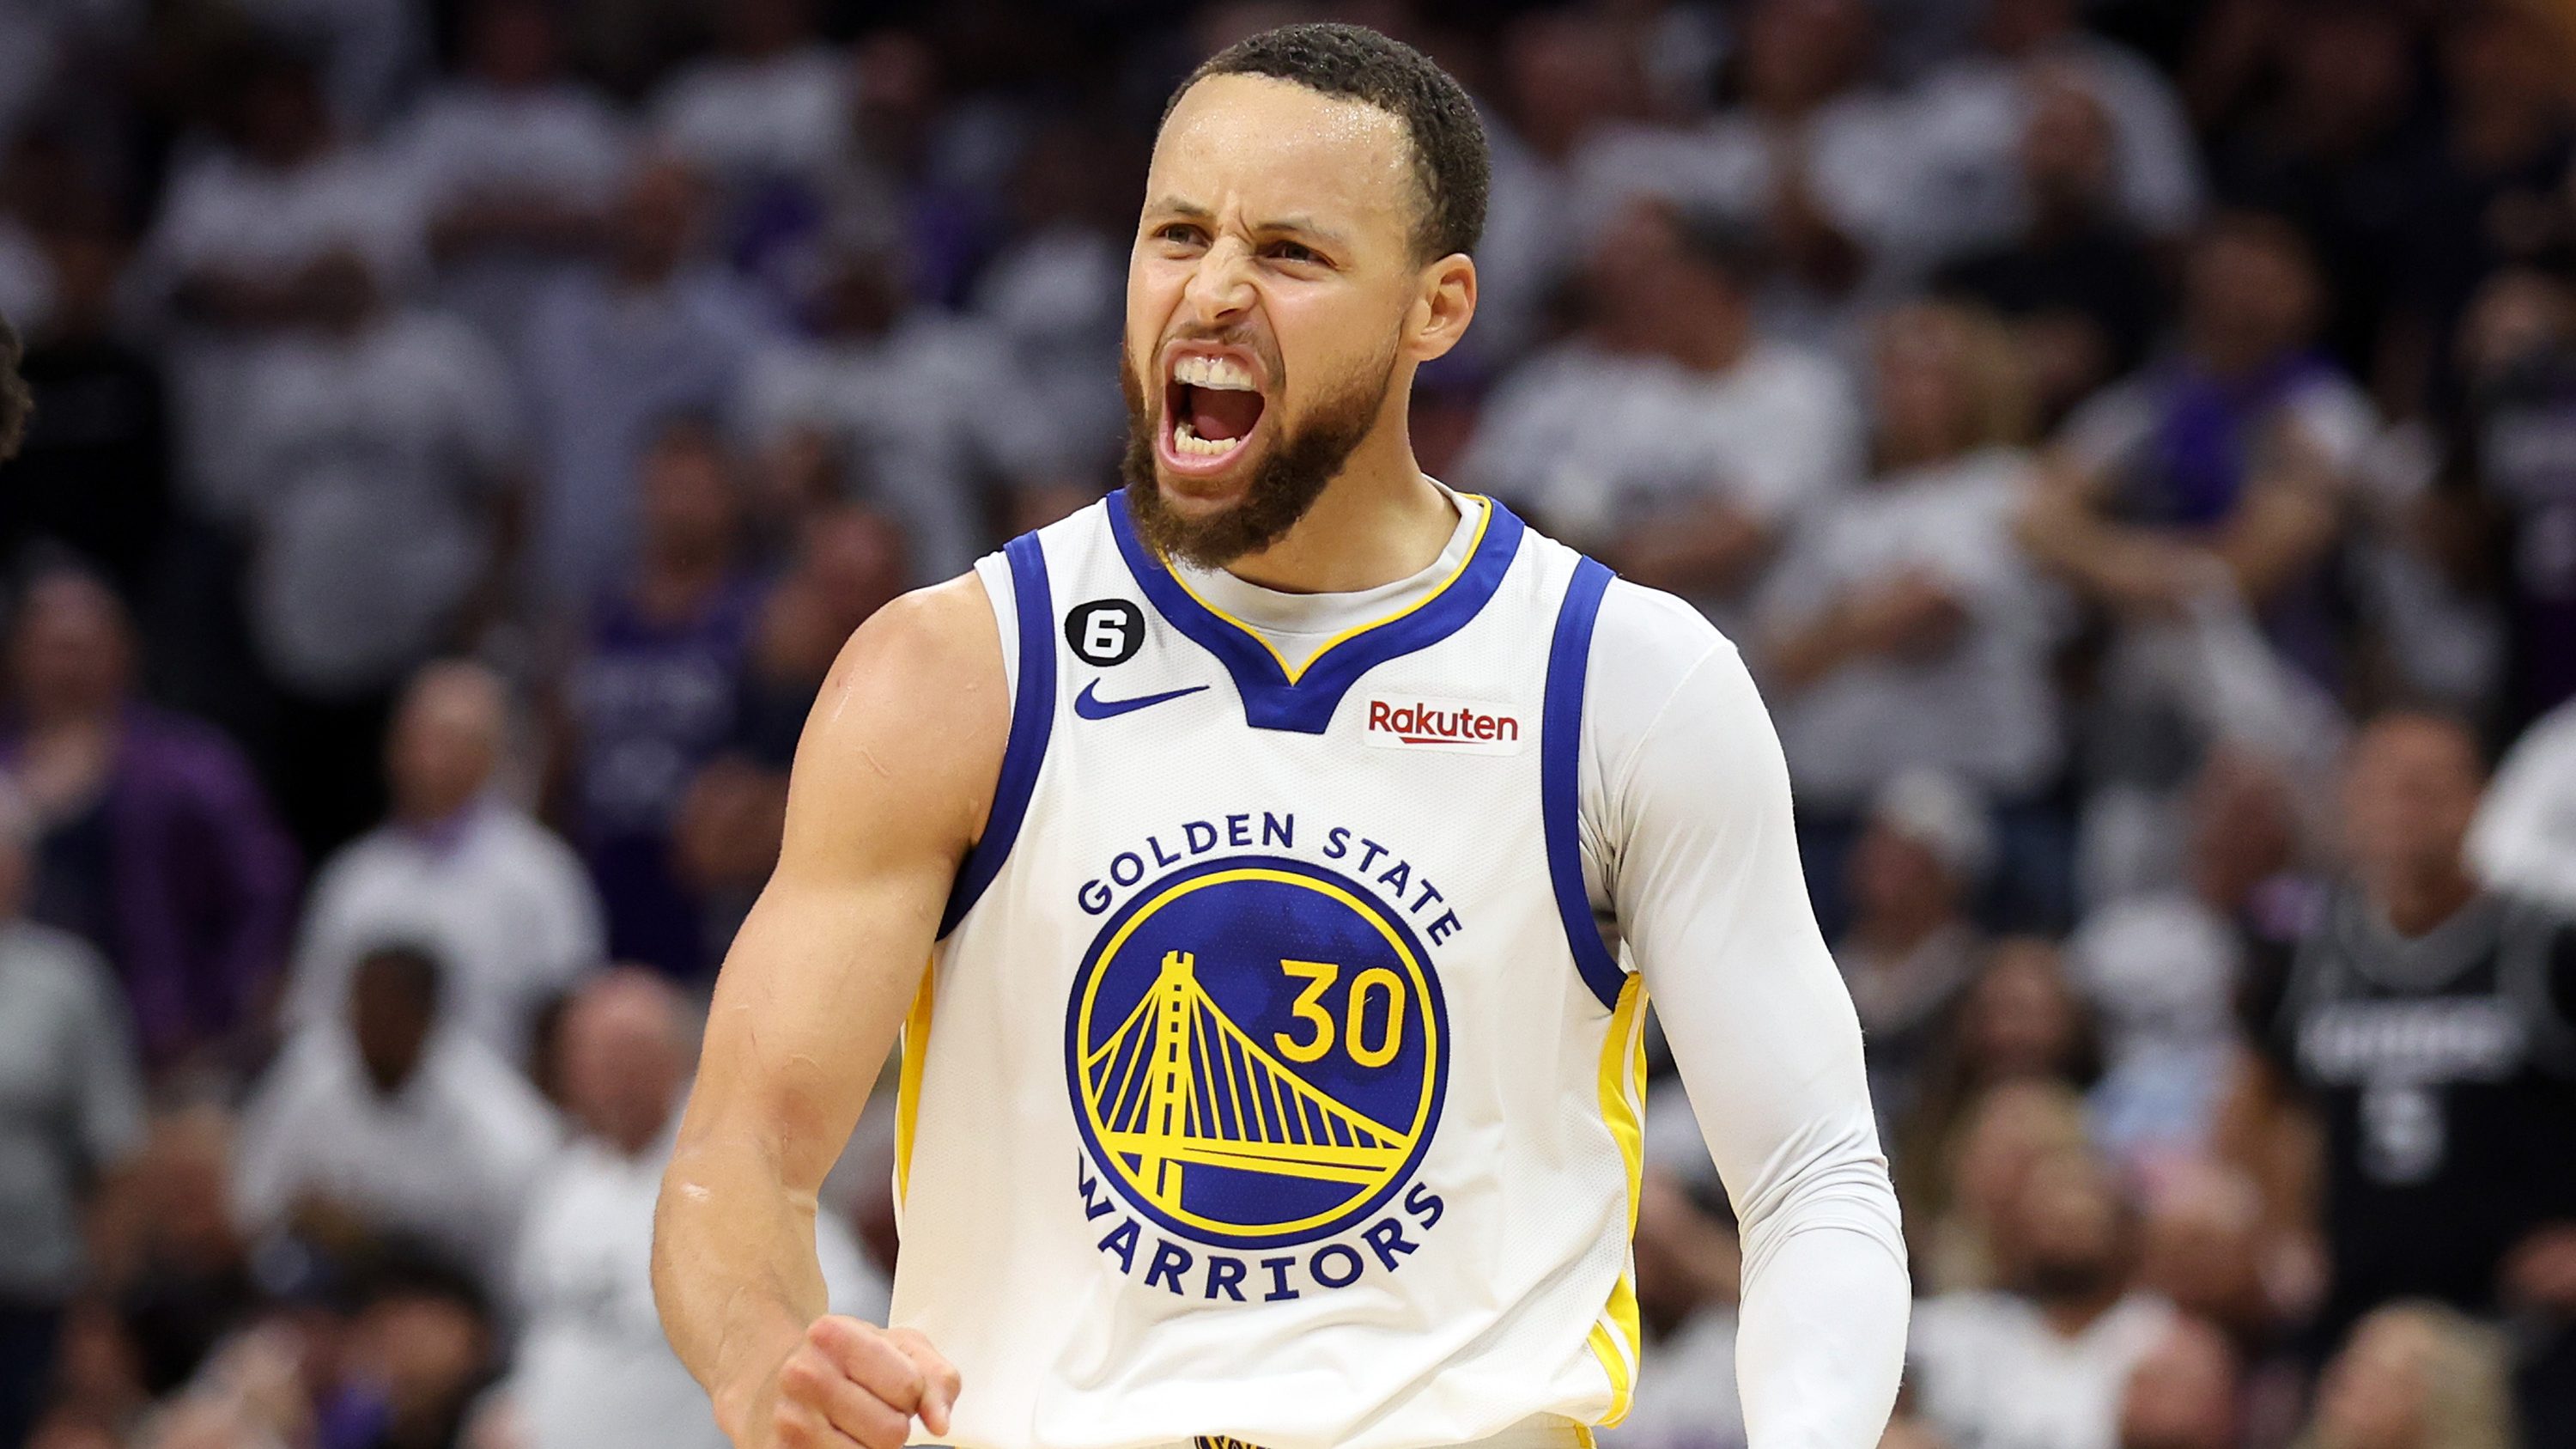 Los Angeles Lakers vs. Golden State Warriors Game 1: Free live